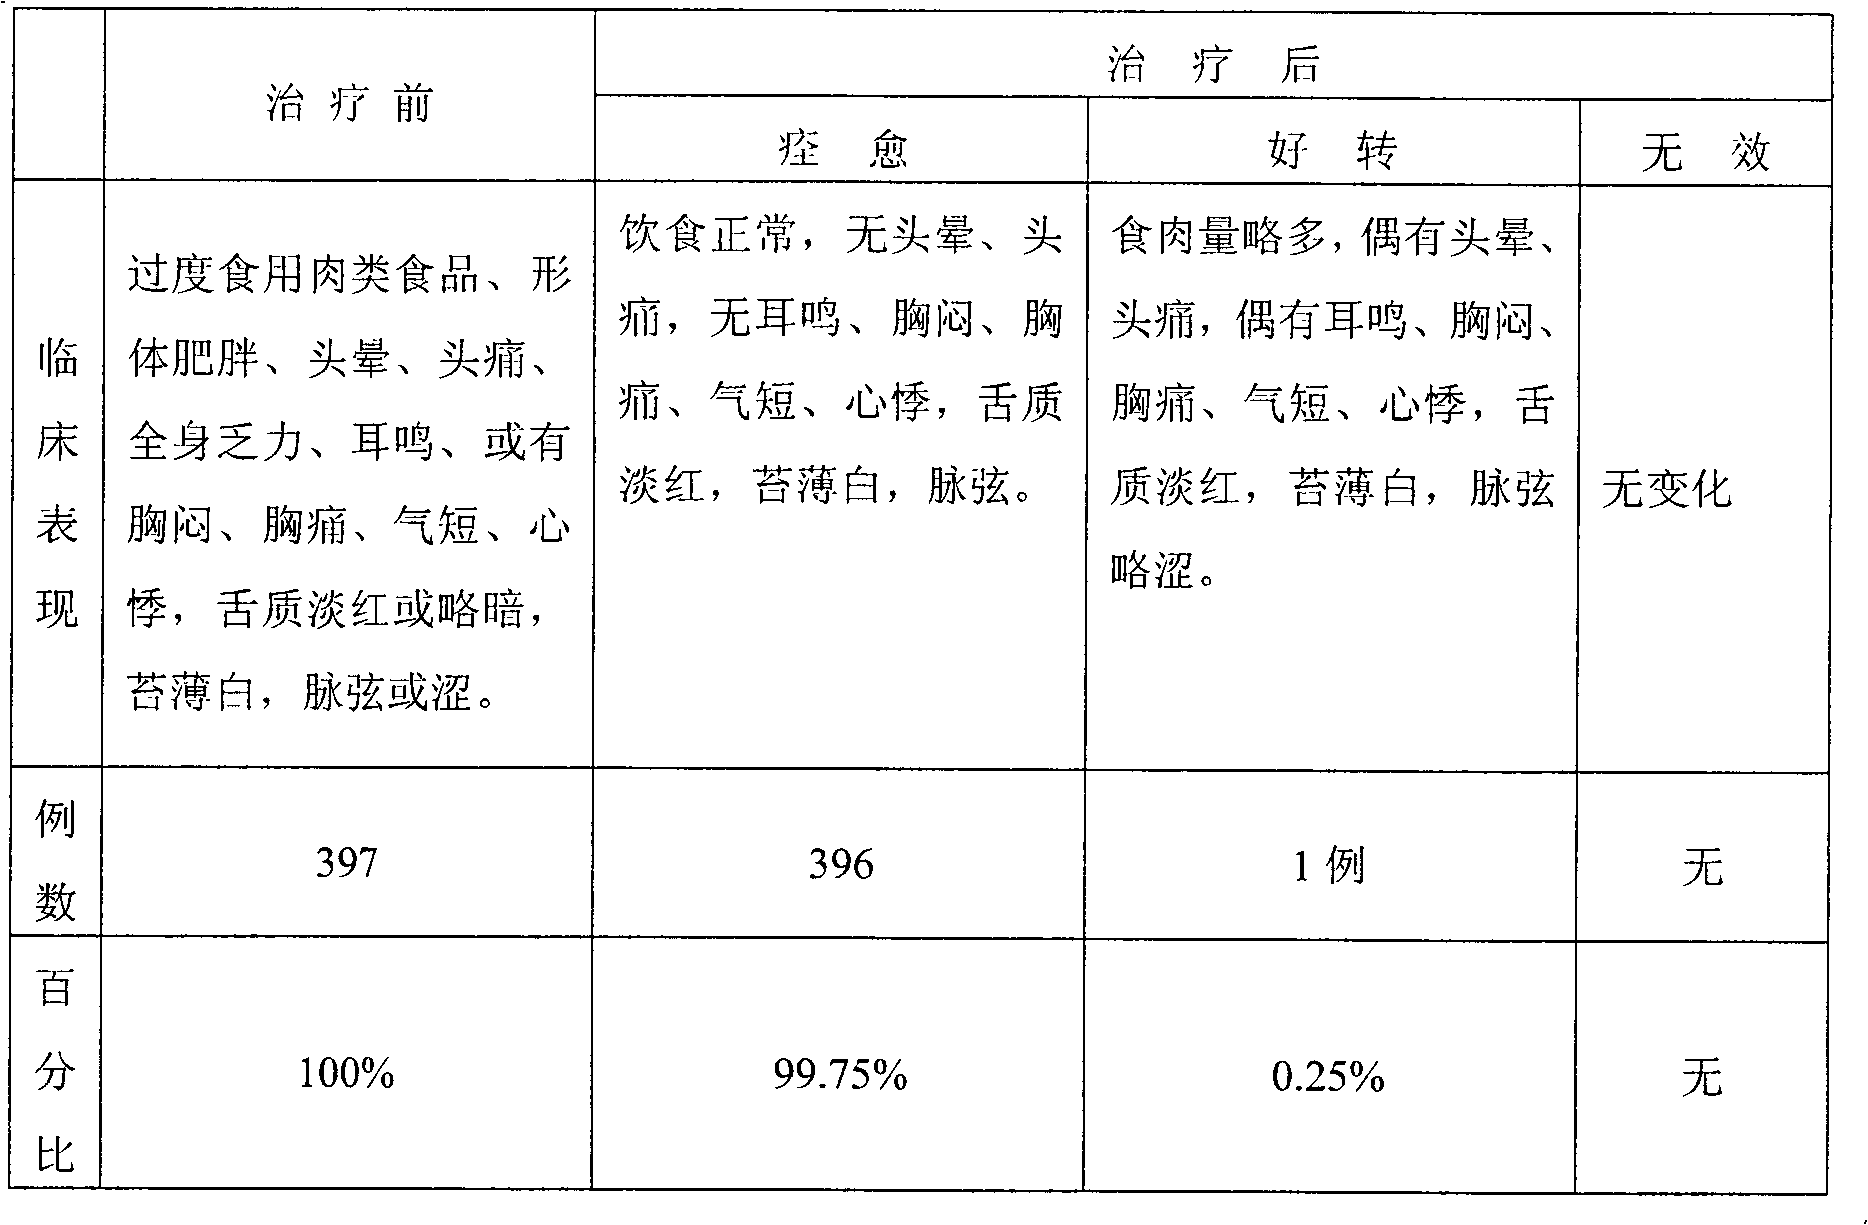 Preparation method of traditional Chinese medicine for treating meat-accumulation type hyperlipidemia